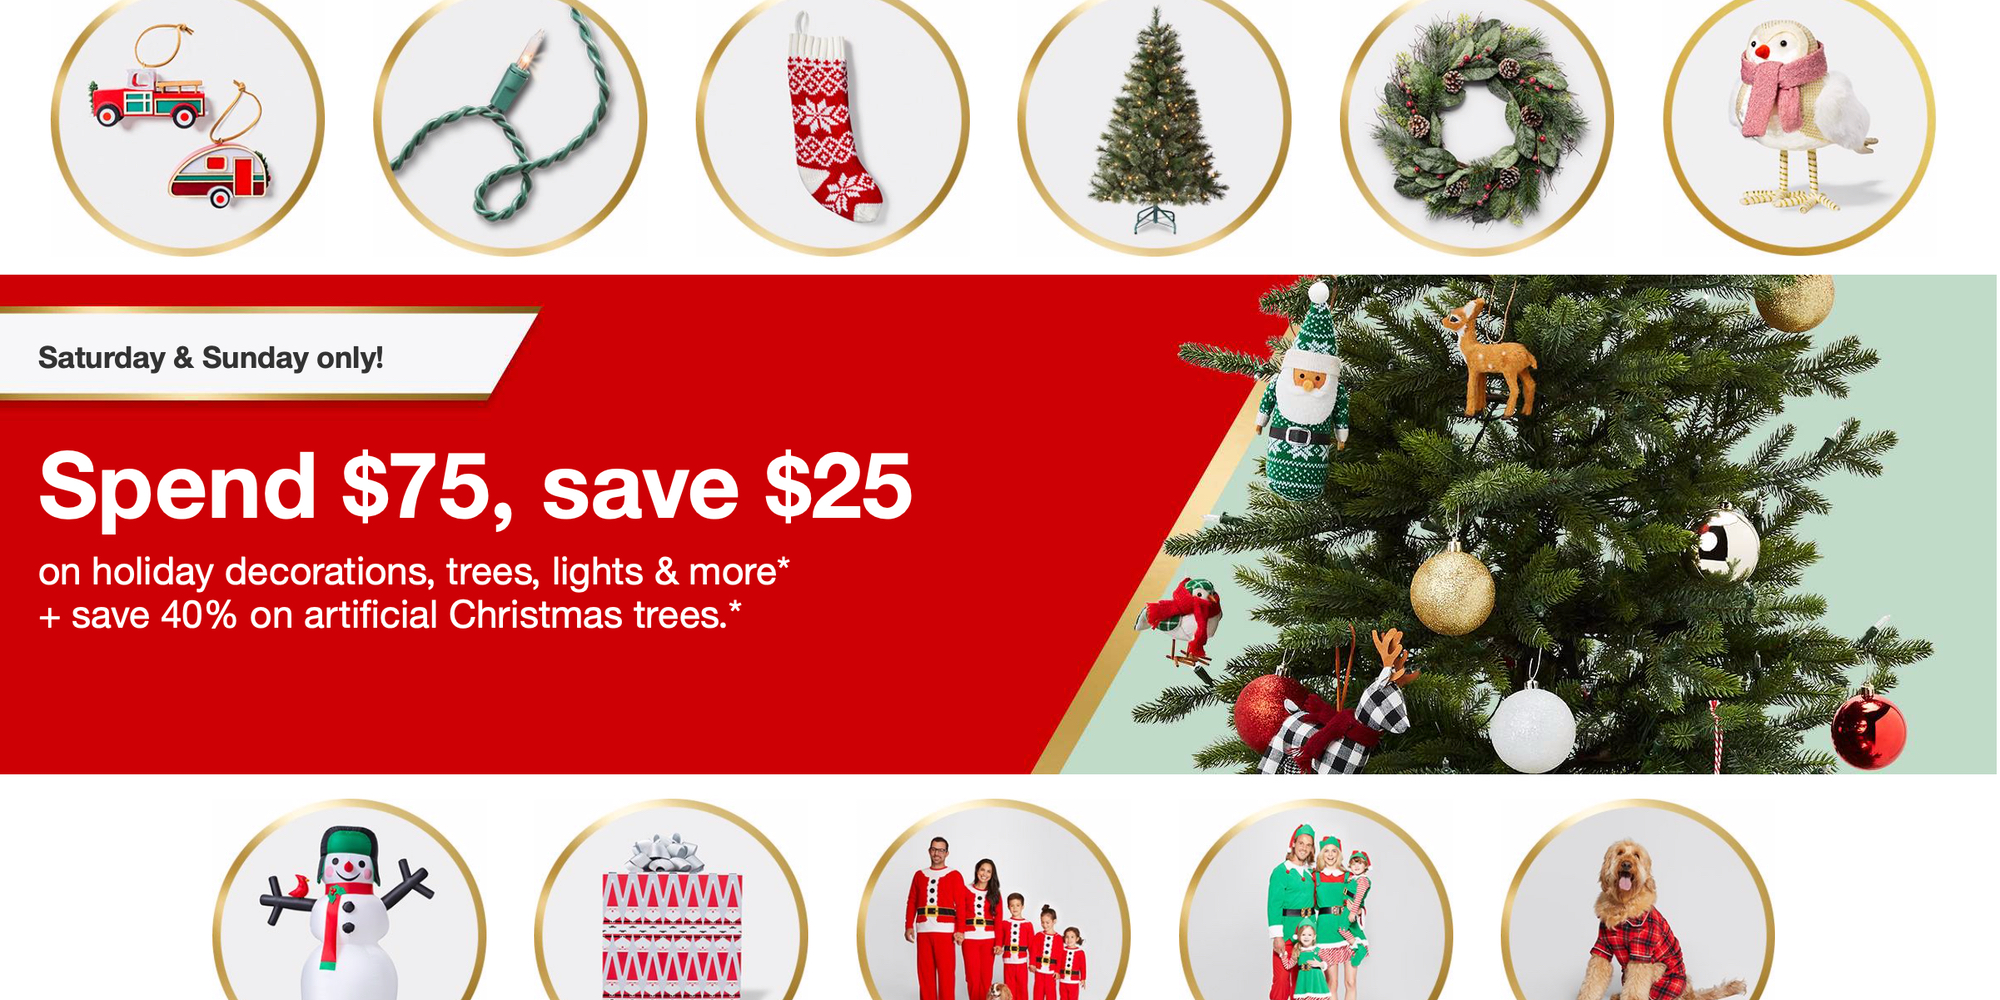 https://9to5toys.com/wp-content/uploads/sites/5/2018/11/target-holiday-decorations-sale.jpg